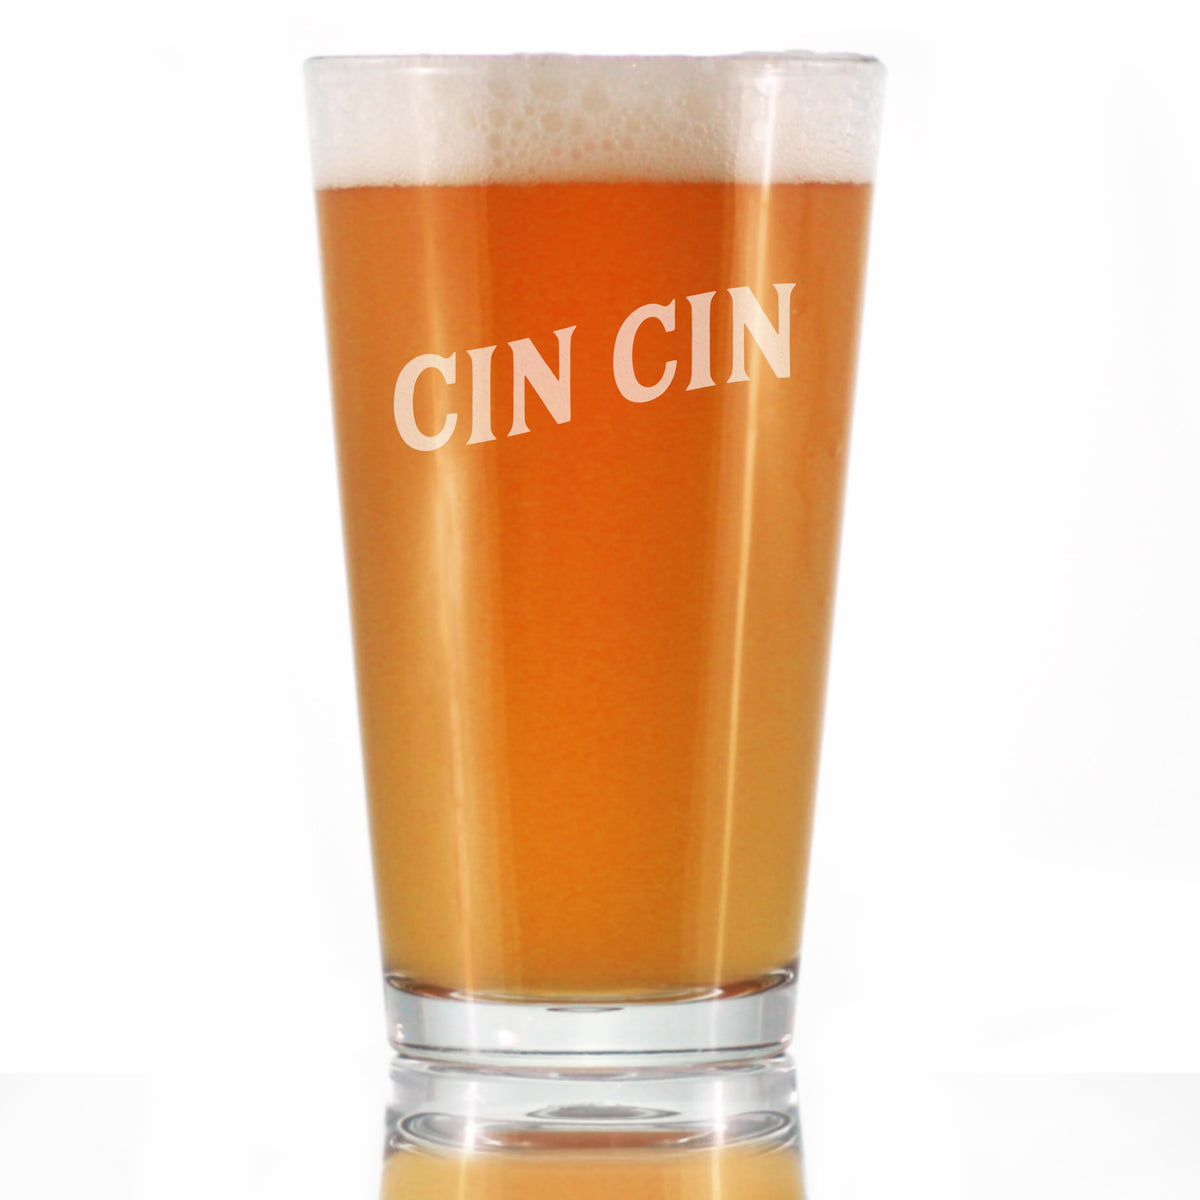 Cin Cin - Italian Cheers - Pint Glass for Beer - Cute Italy Themed Gifts or Party Decor for Women &amp; Men - 16 Oz